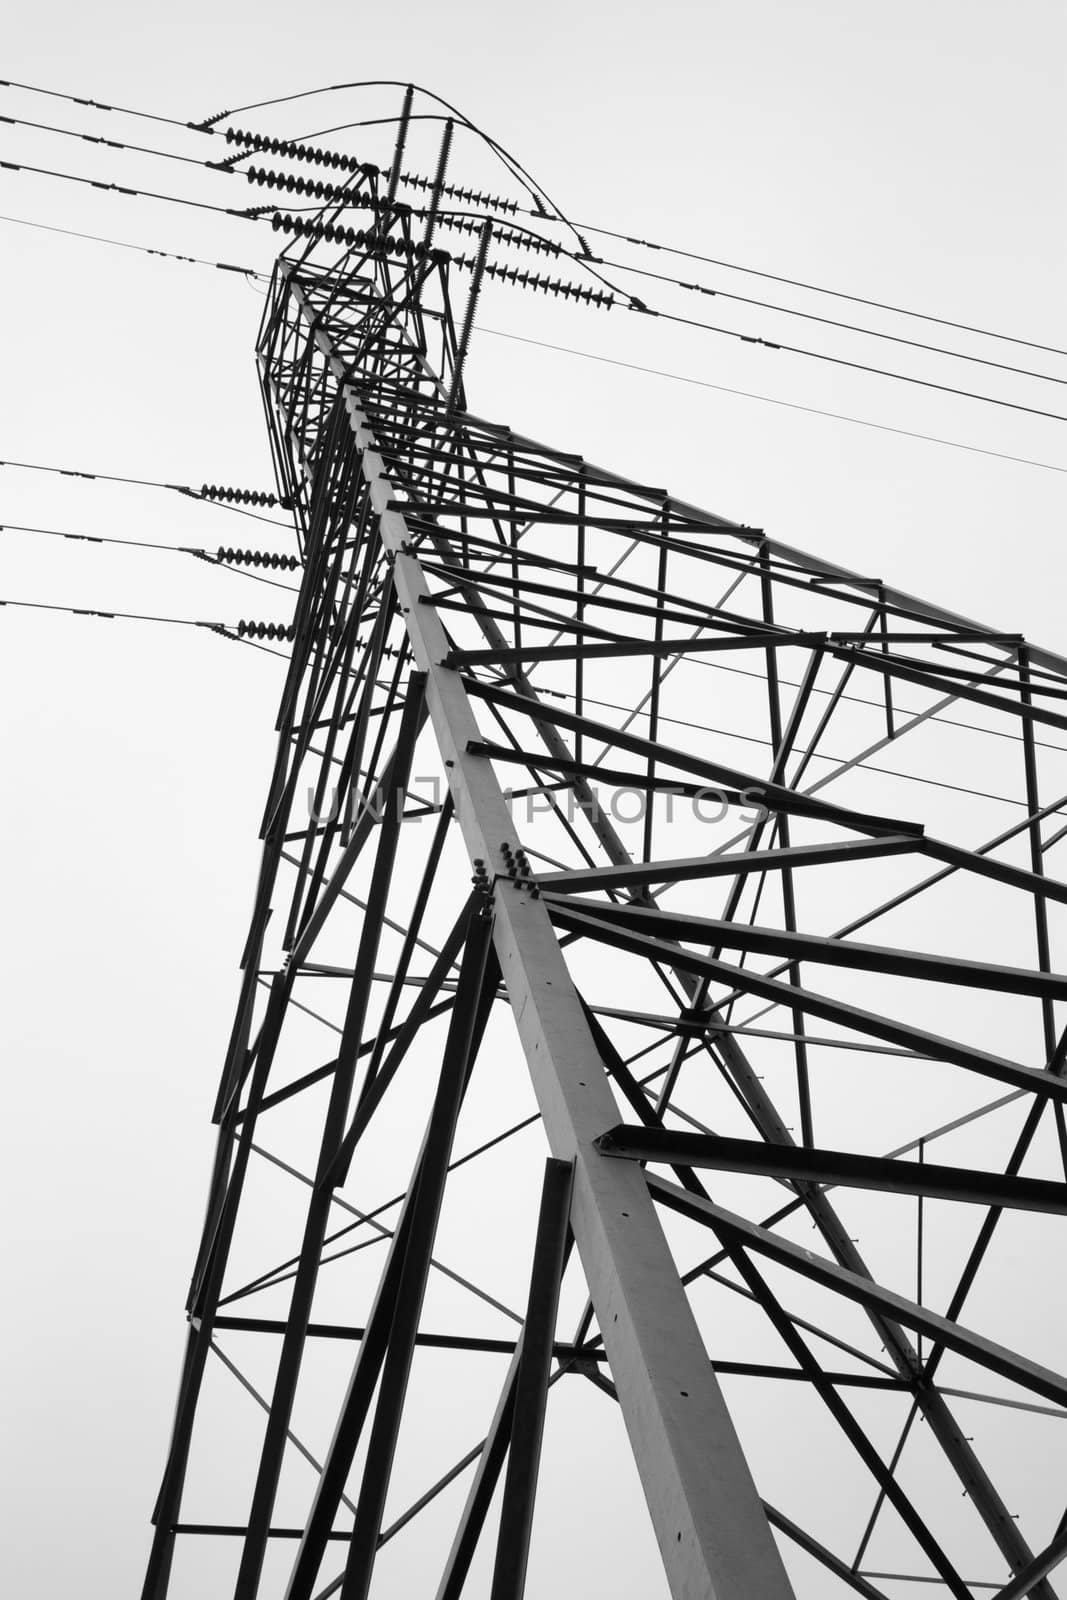 Side view of electric power tower looking from the base to the top against cloudy sky